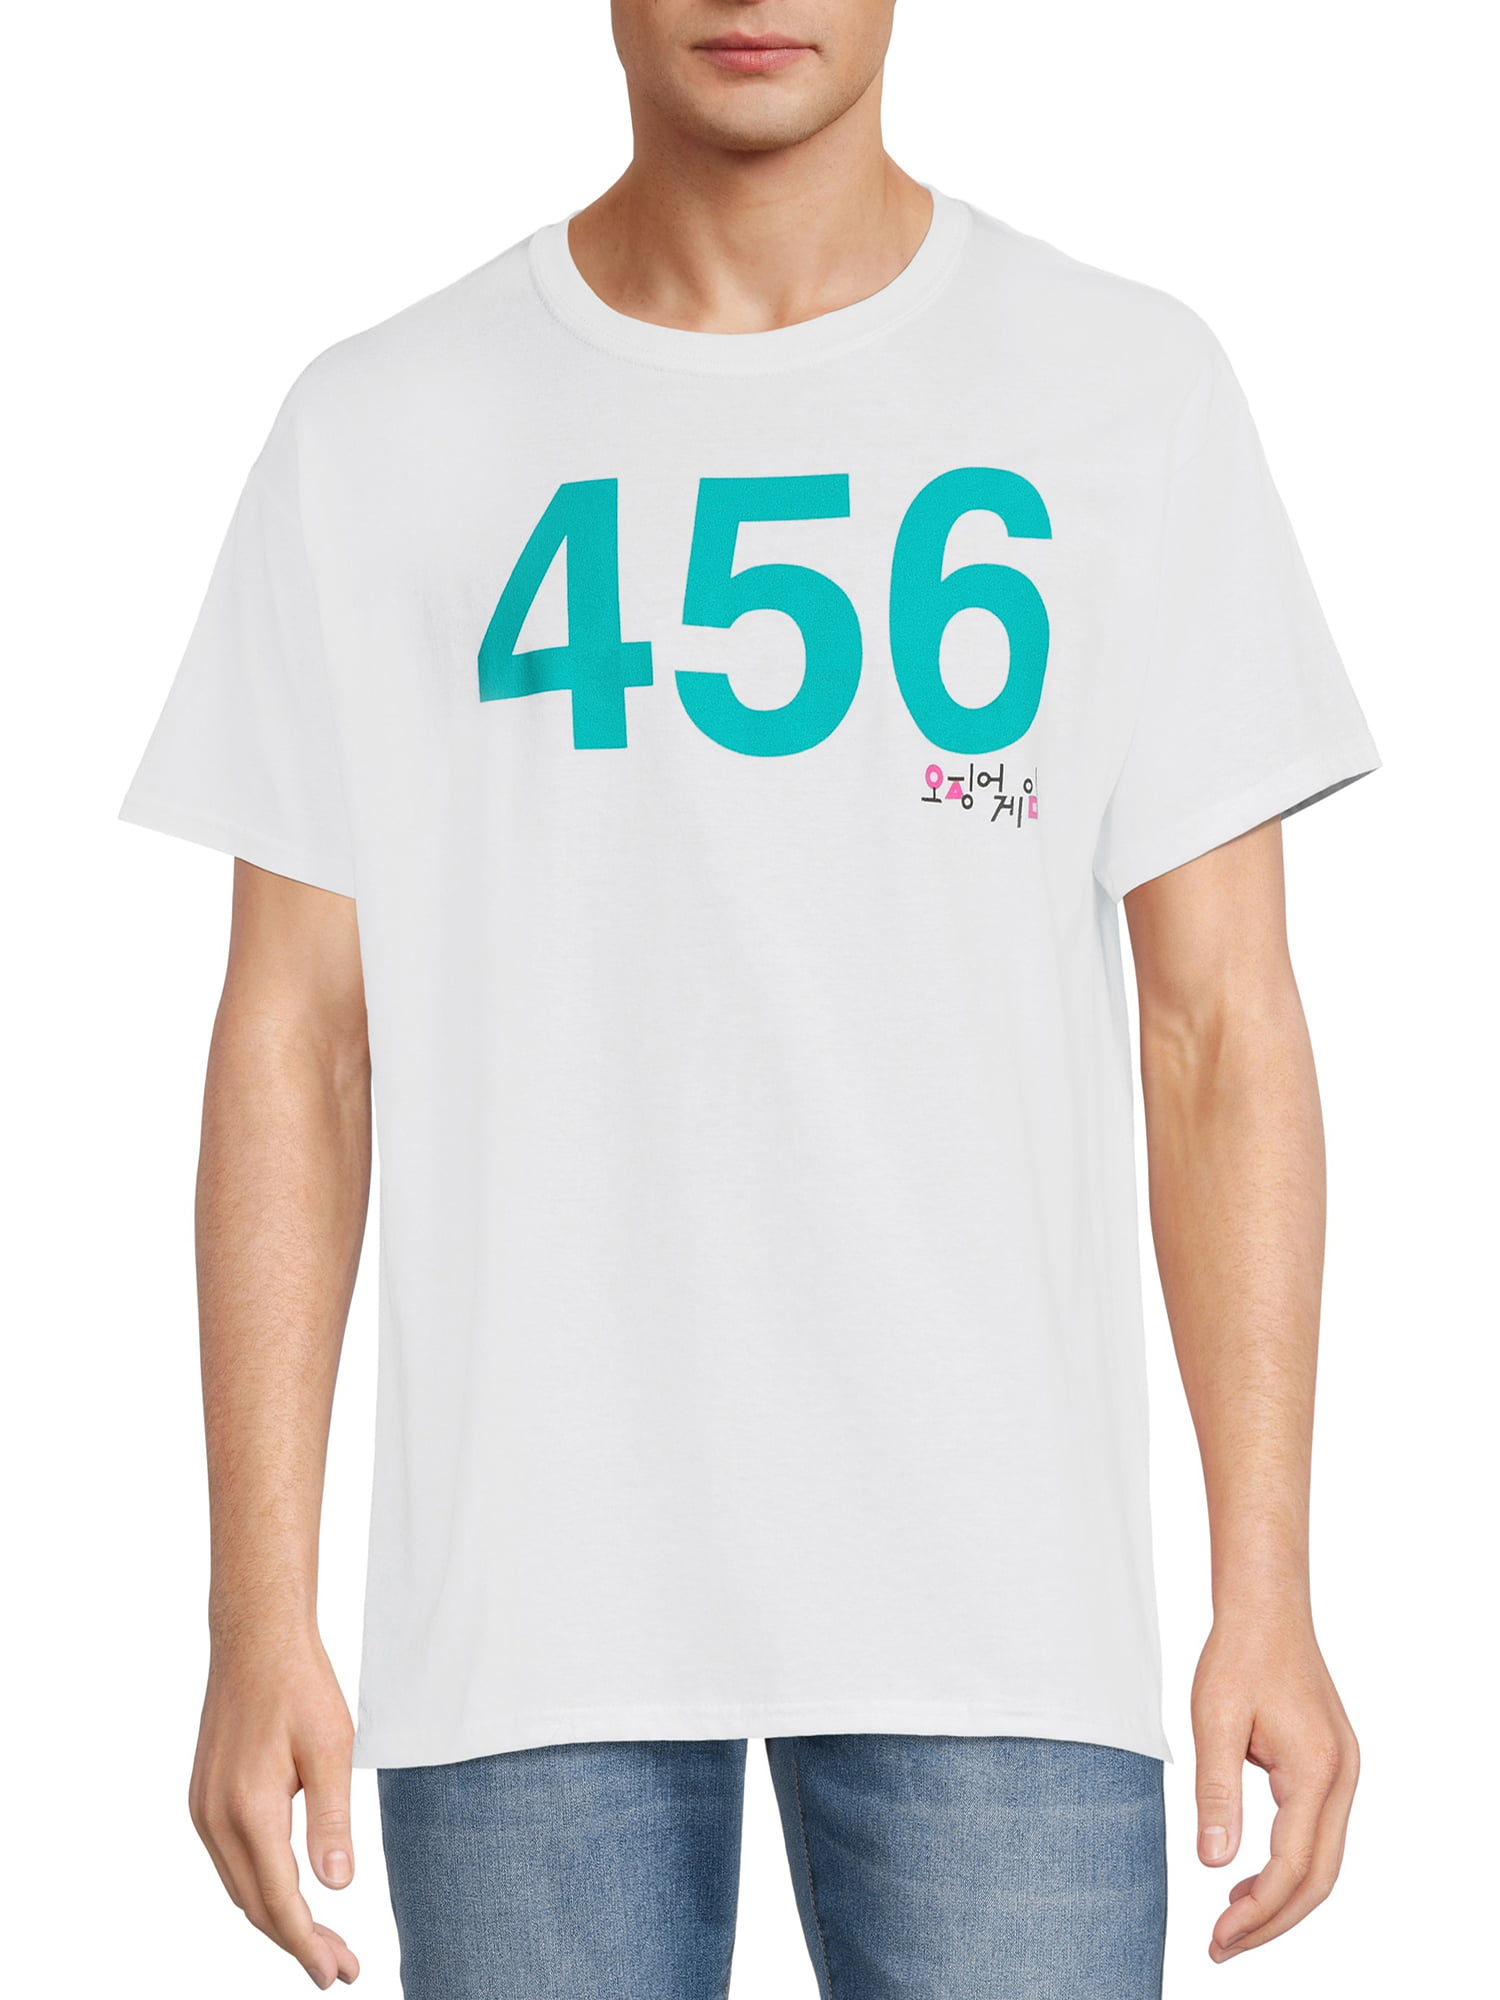 Squid Game Player Number Patch T-Shirt Inspired Logo Korean 456 Netflix  Gift